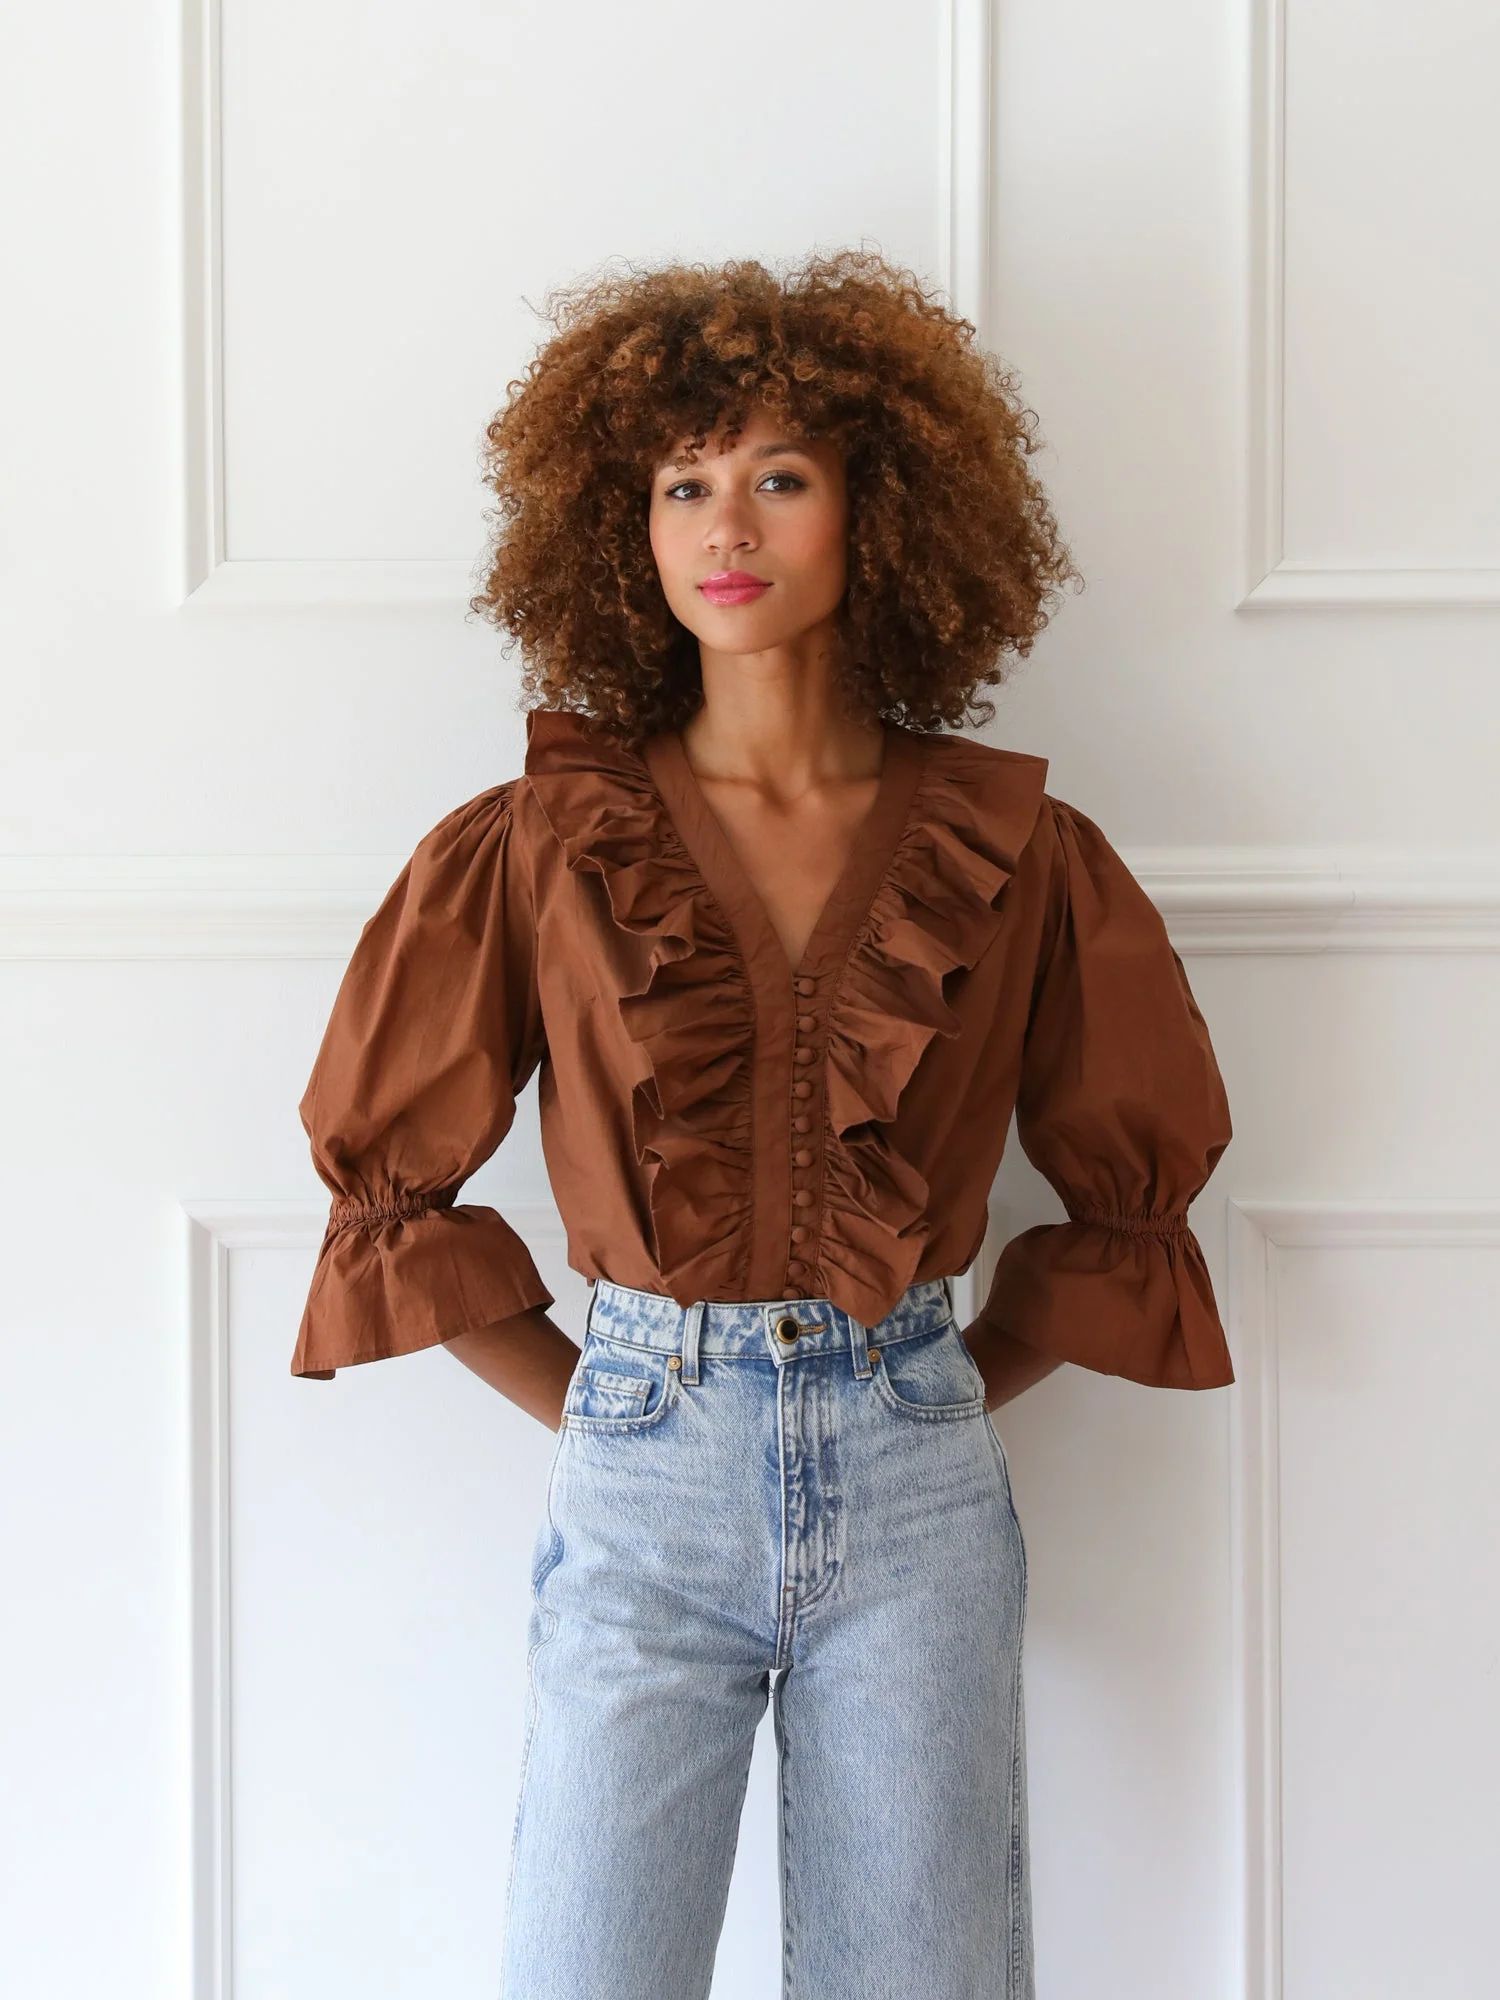 Shop Mille - Hanna Top in Clay | Mille